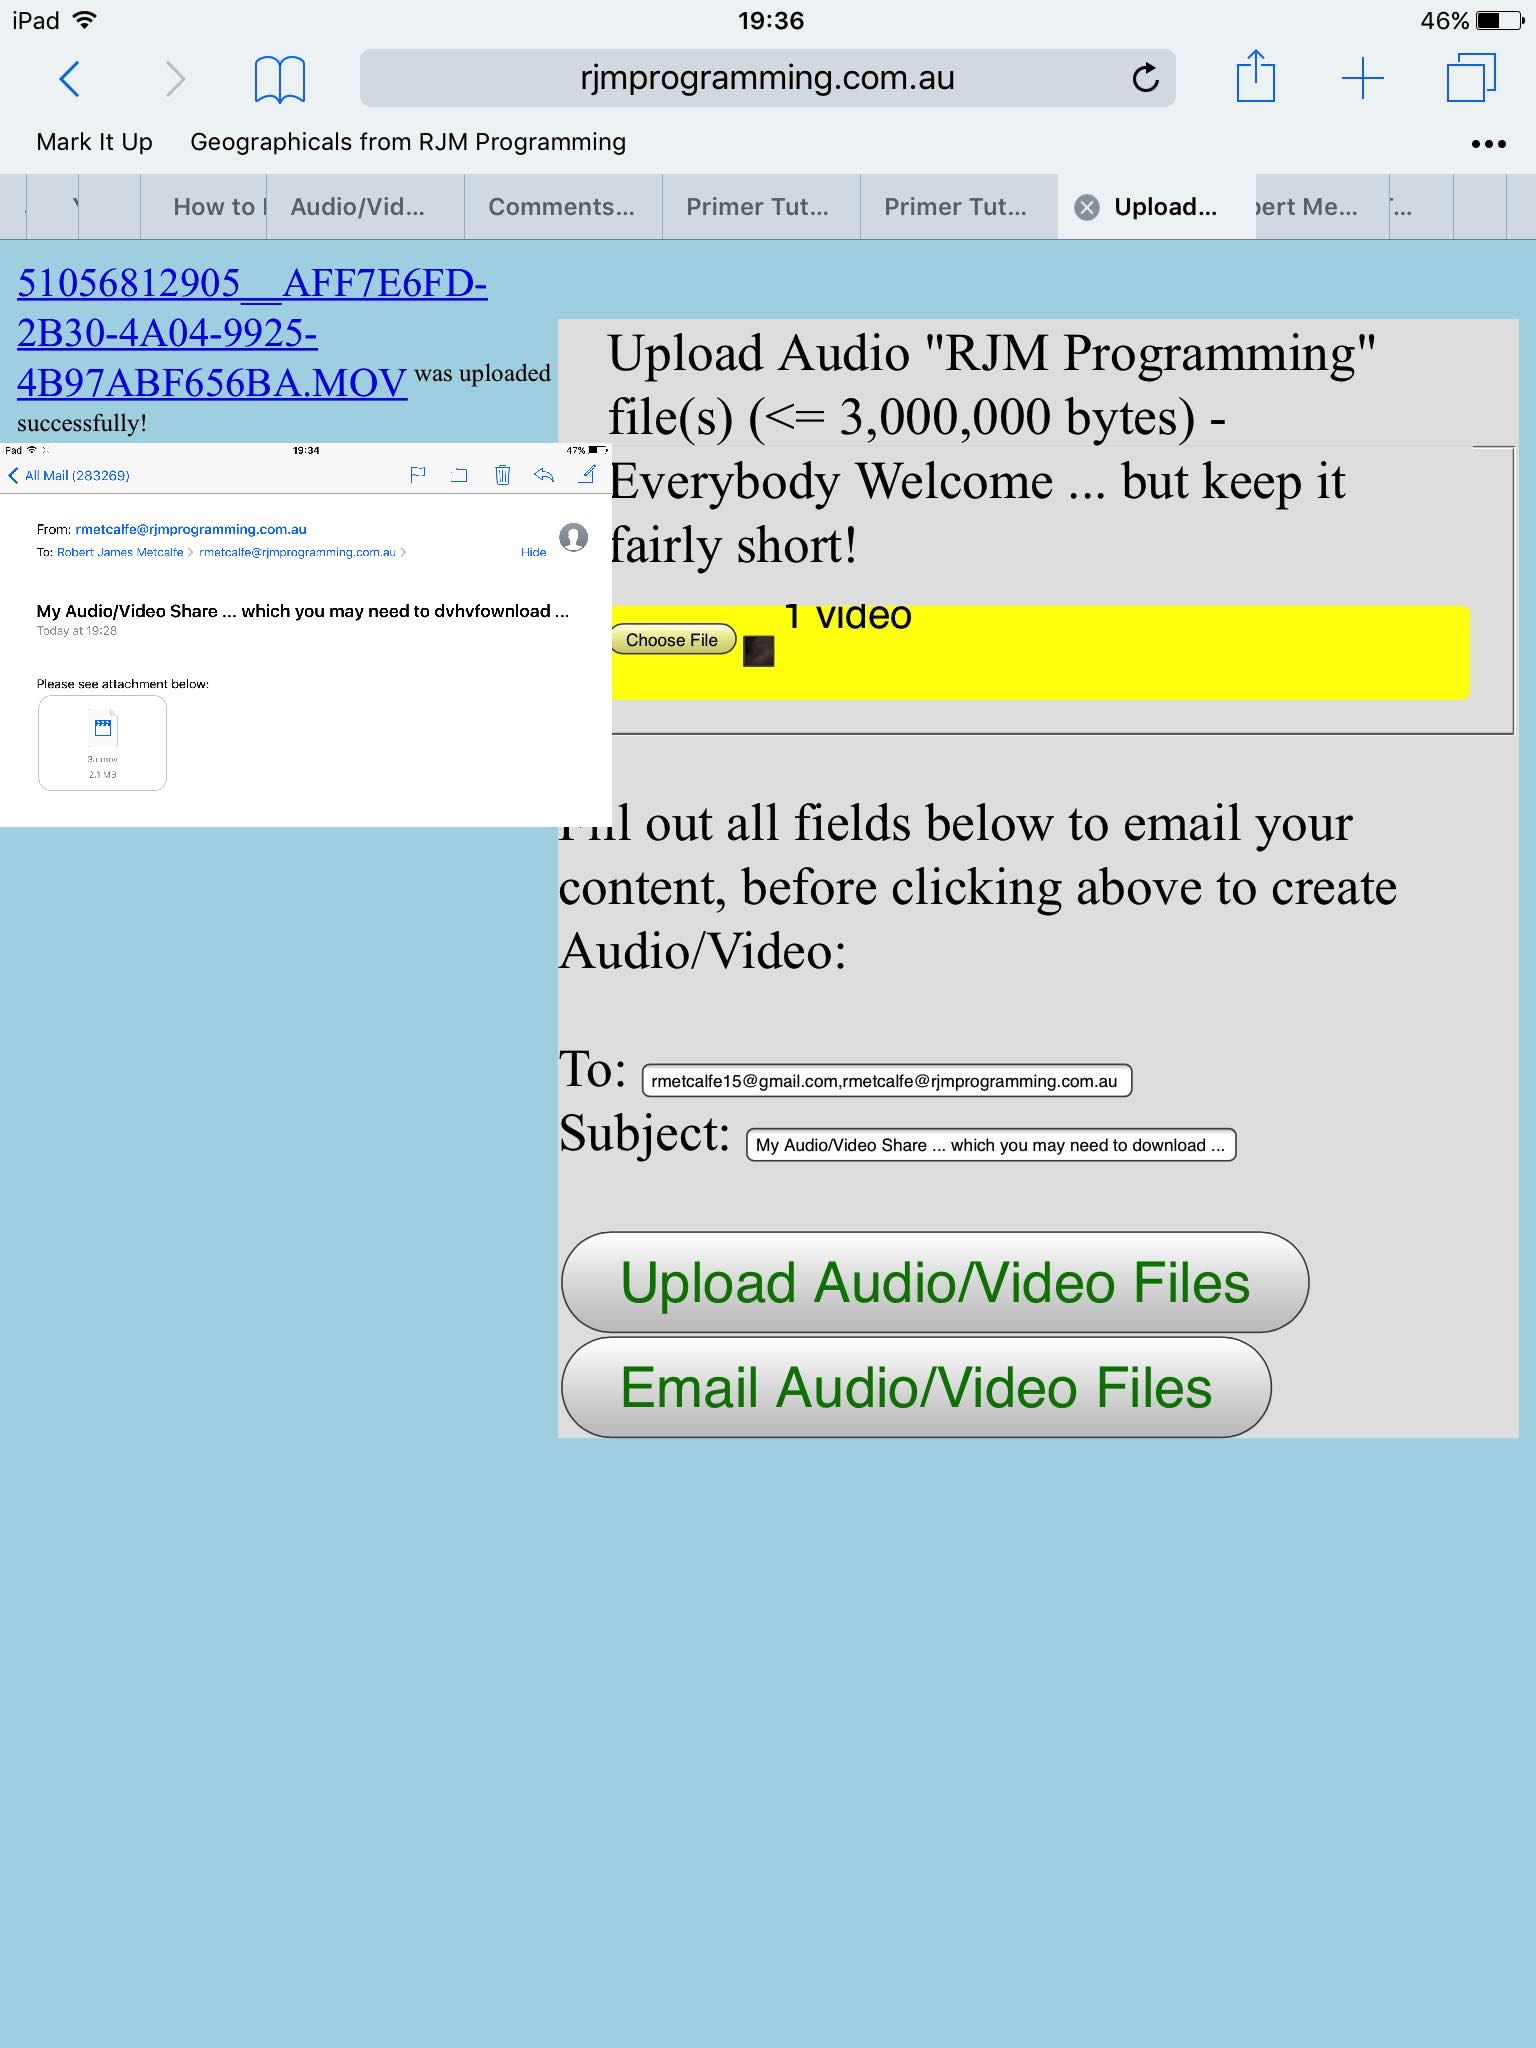 Audio/Video HTML5 Form Input Capture via PHP Email Tutorial